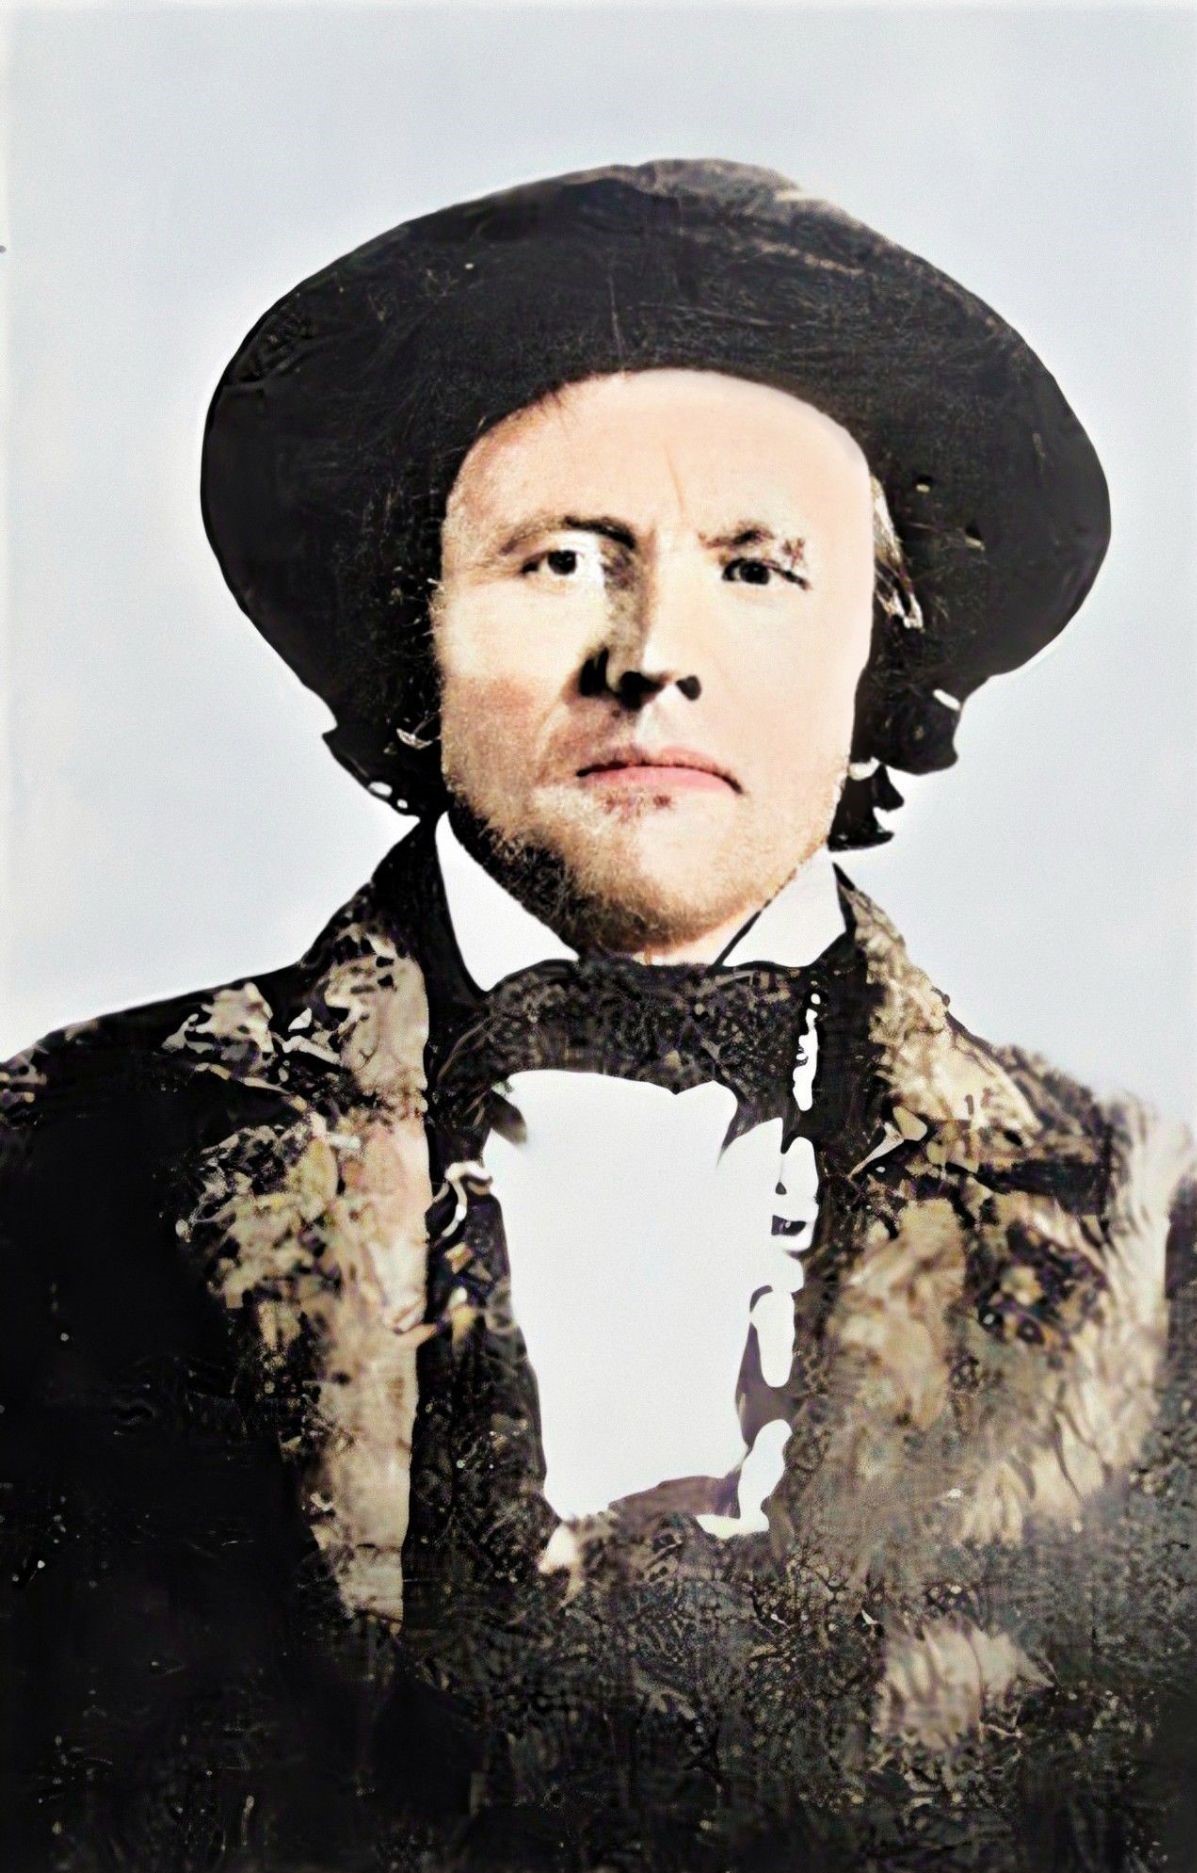 Kit Carson 19th cnetury Colorized Enhanced Comparison 1 | <strong>Who was the Legendary Kit Carson?</strong>